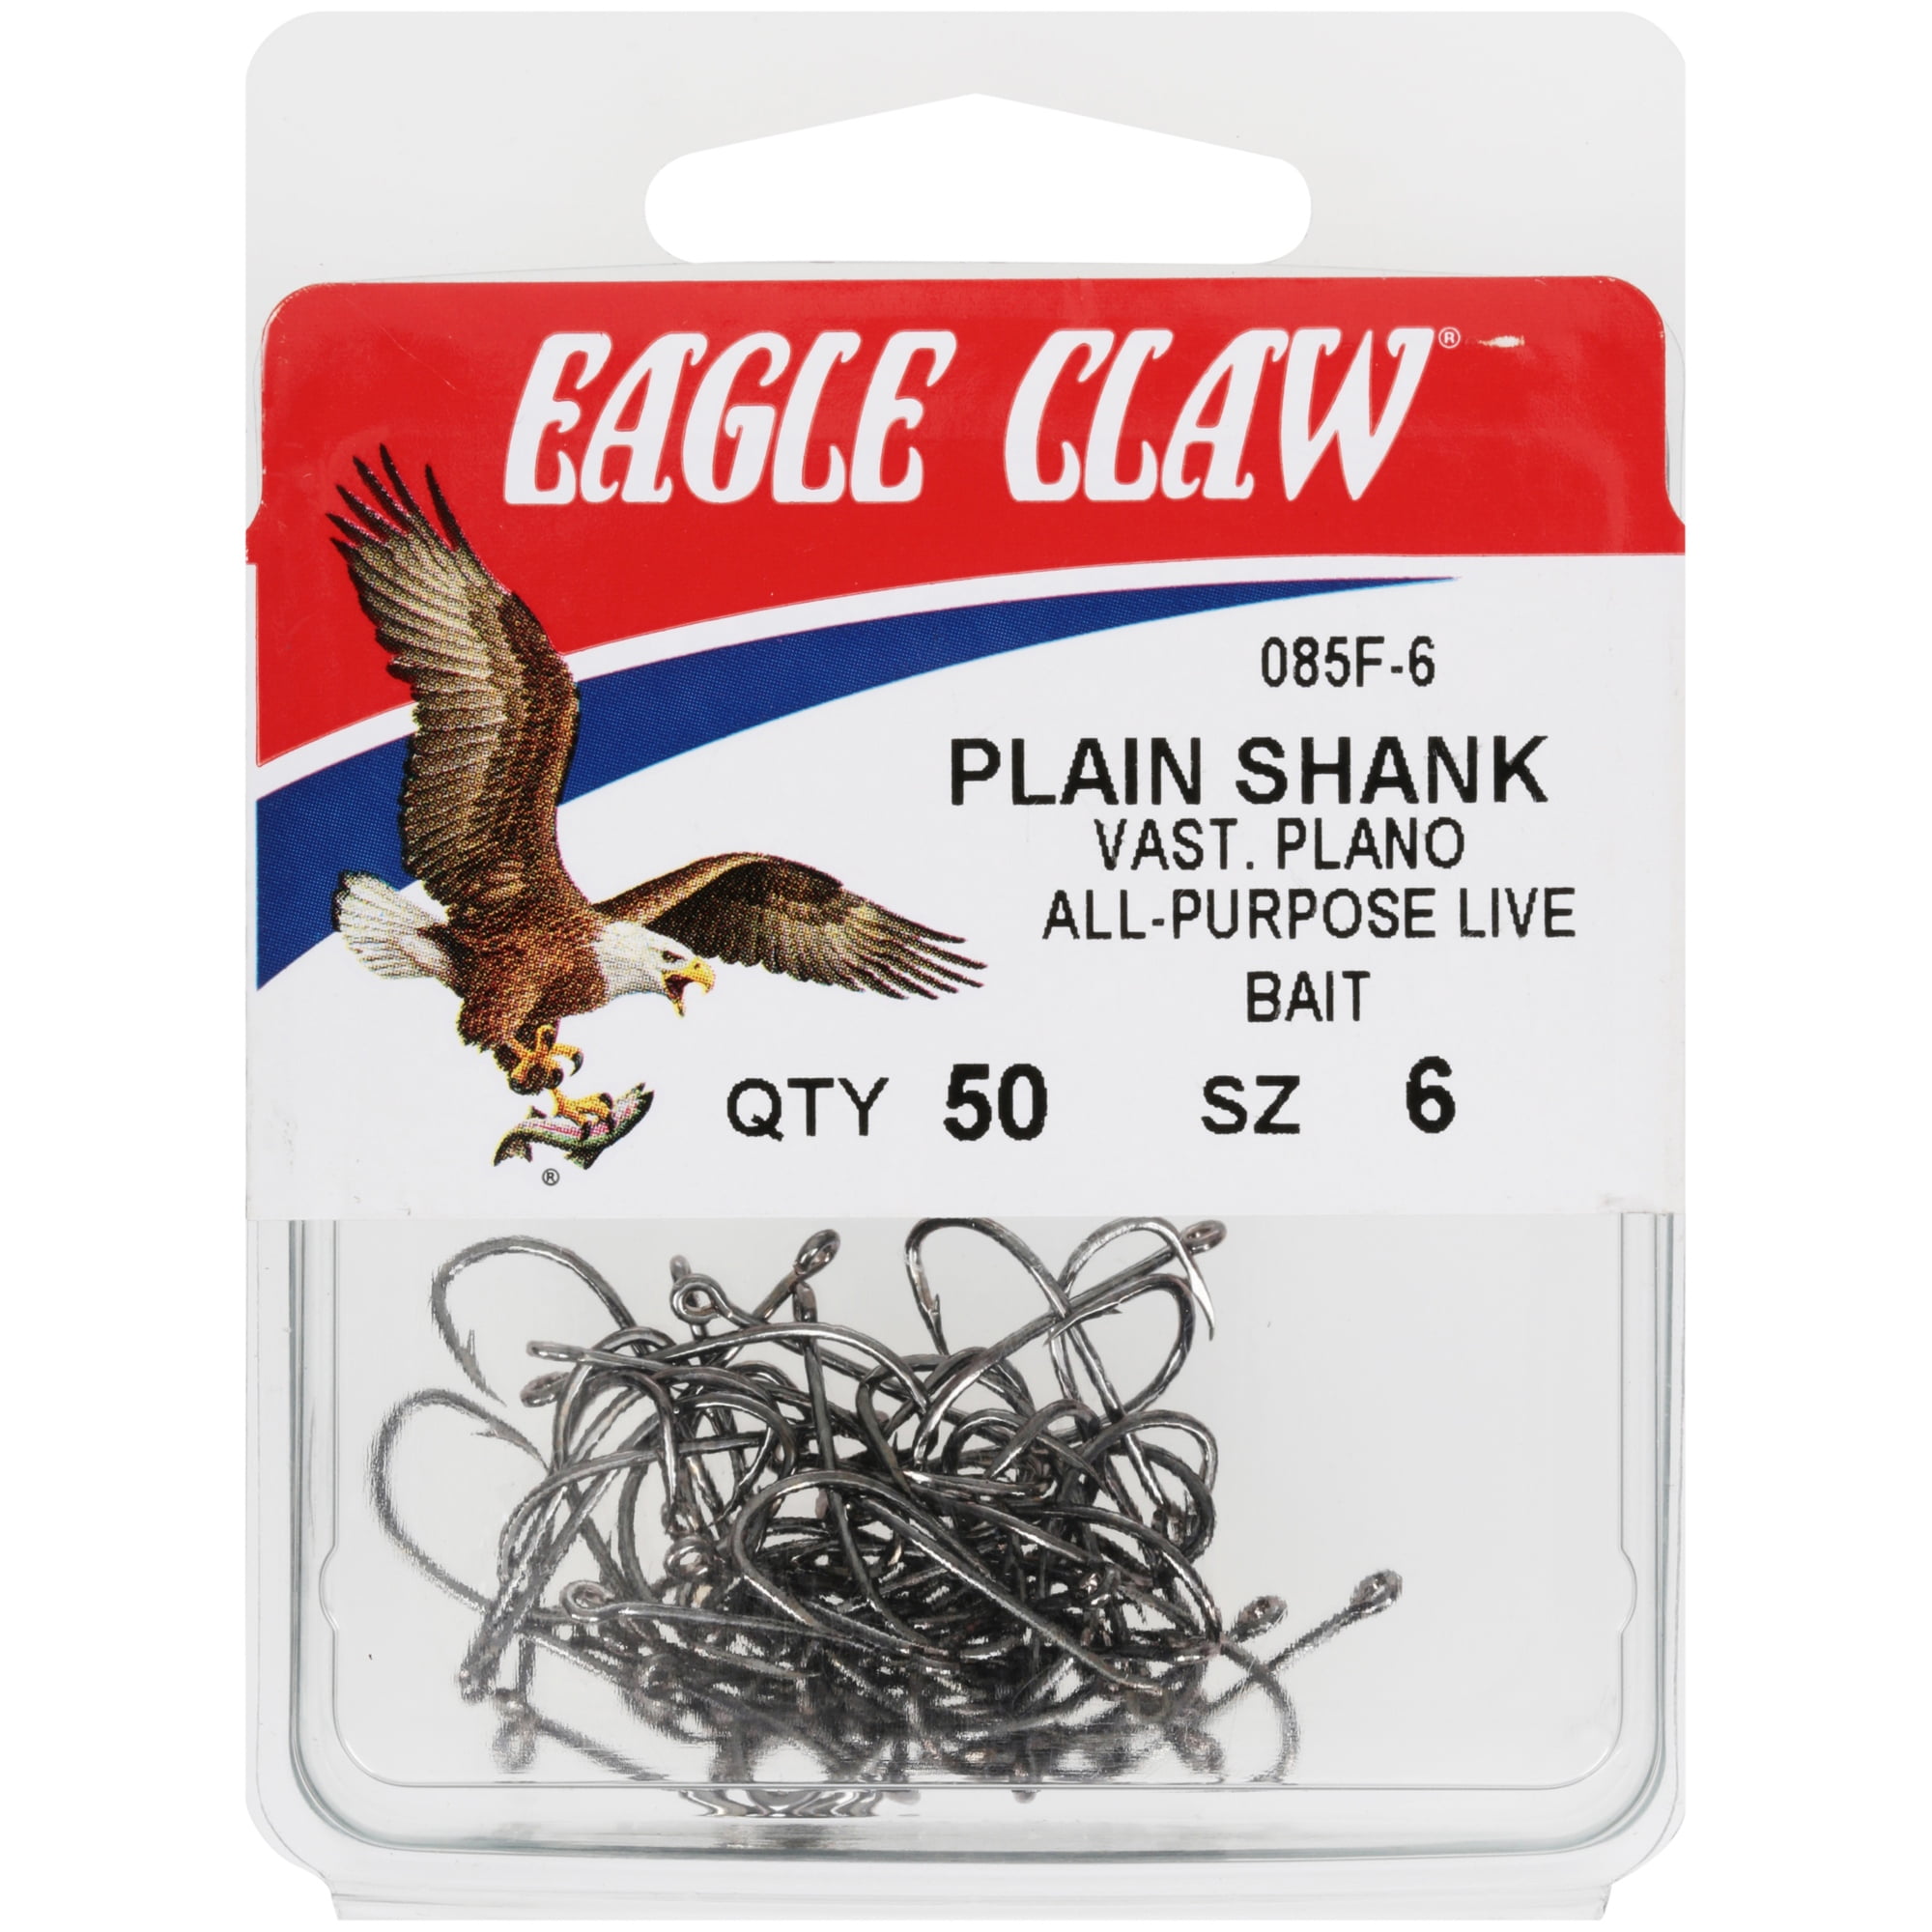 Eagle Claw 085FH-1/0 Plain Shank Offset Hook, Nickel, Size 1/0, 40